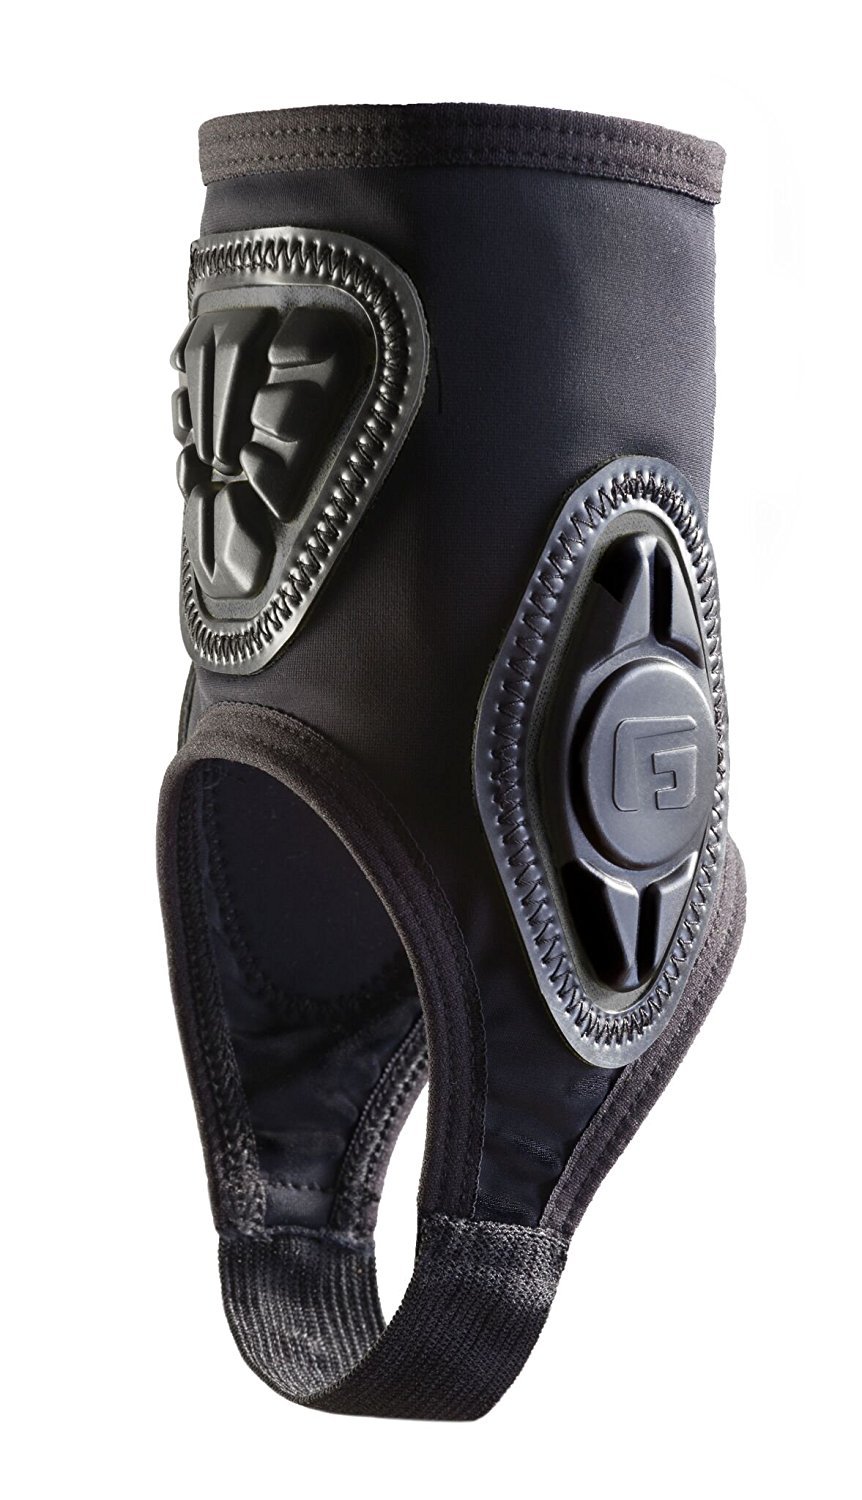 G-Form Pro Ankle Guards